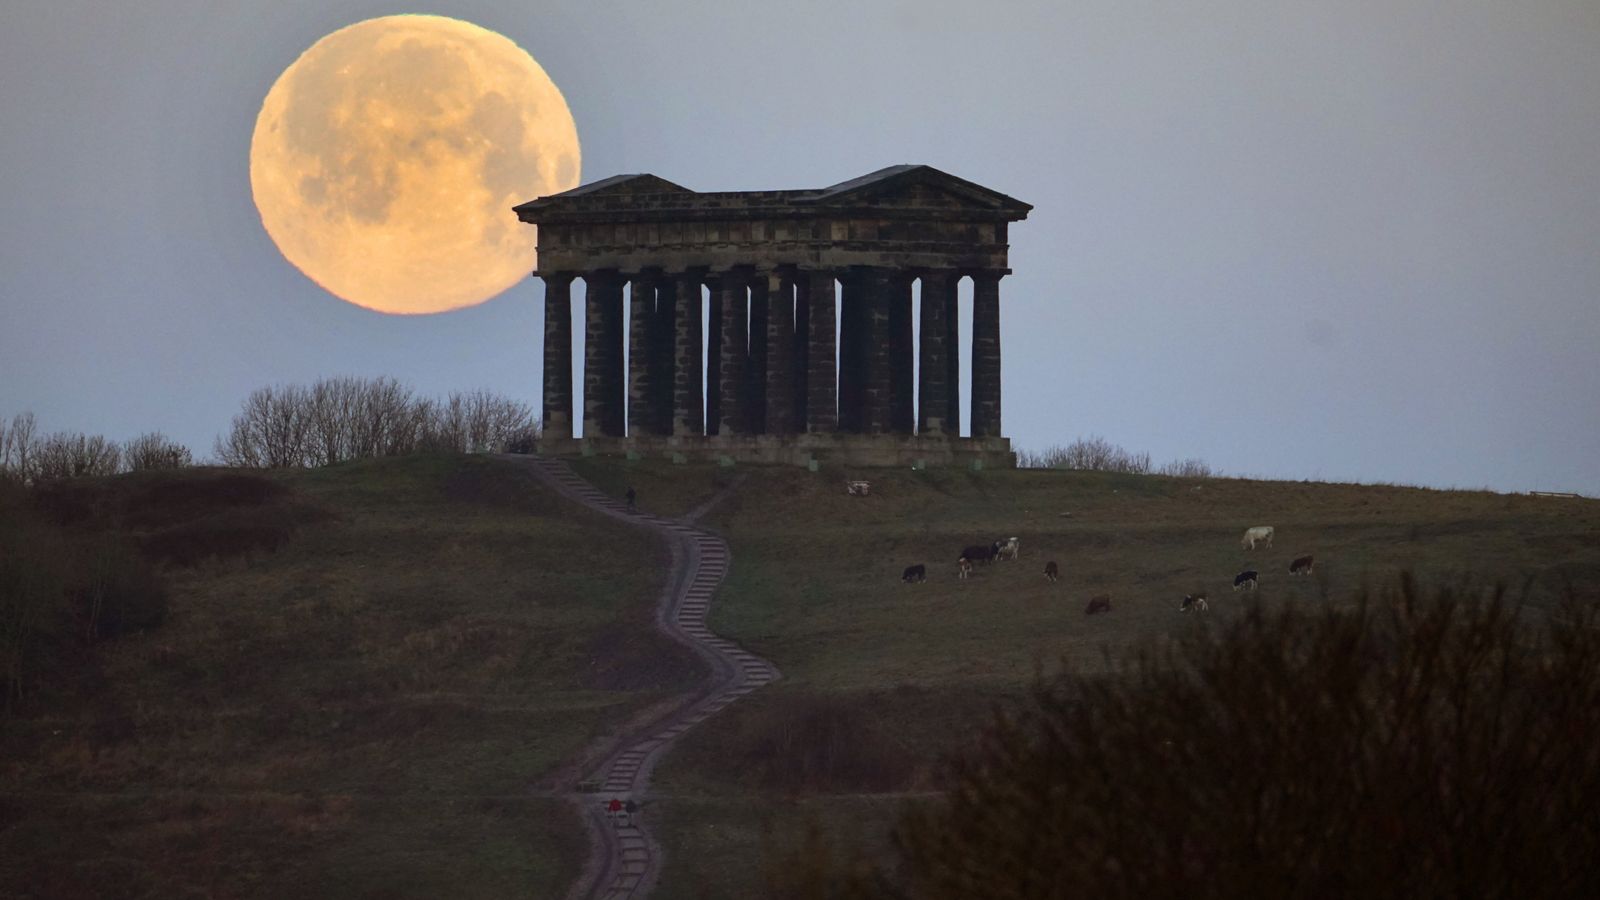 Cold weather alert starts today as 'snow moon' set to delight UK sky-gazers